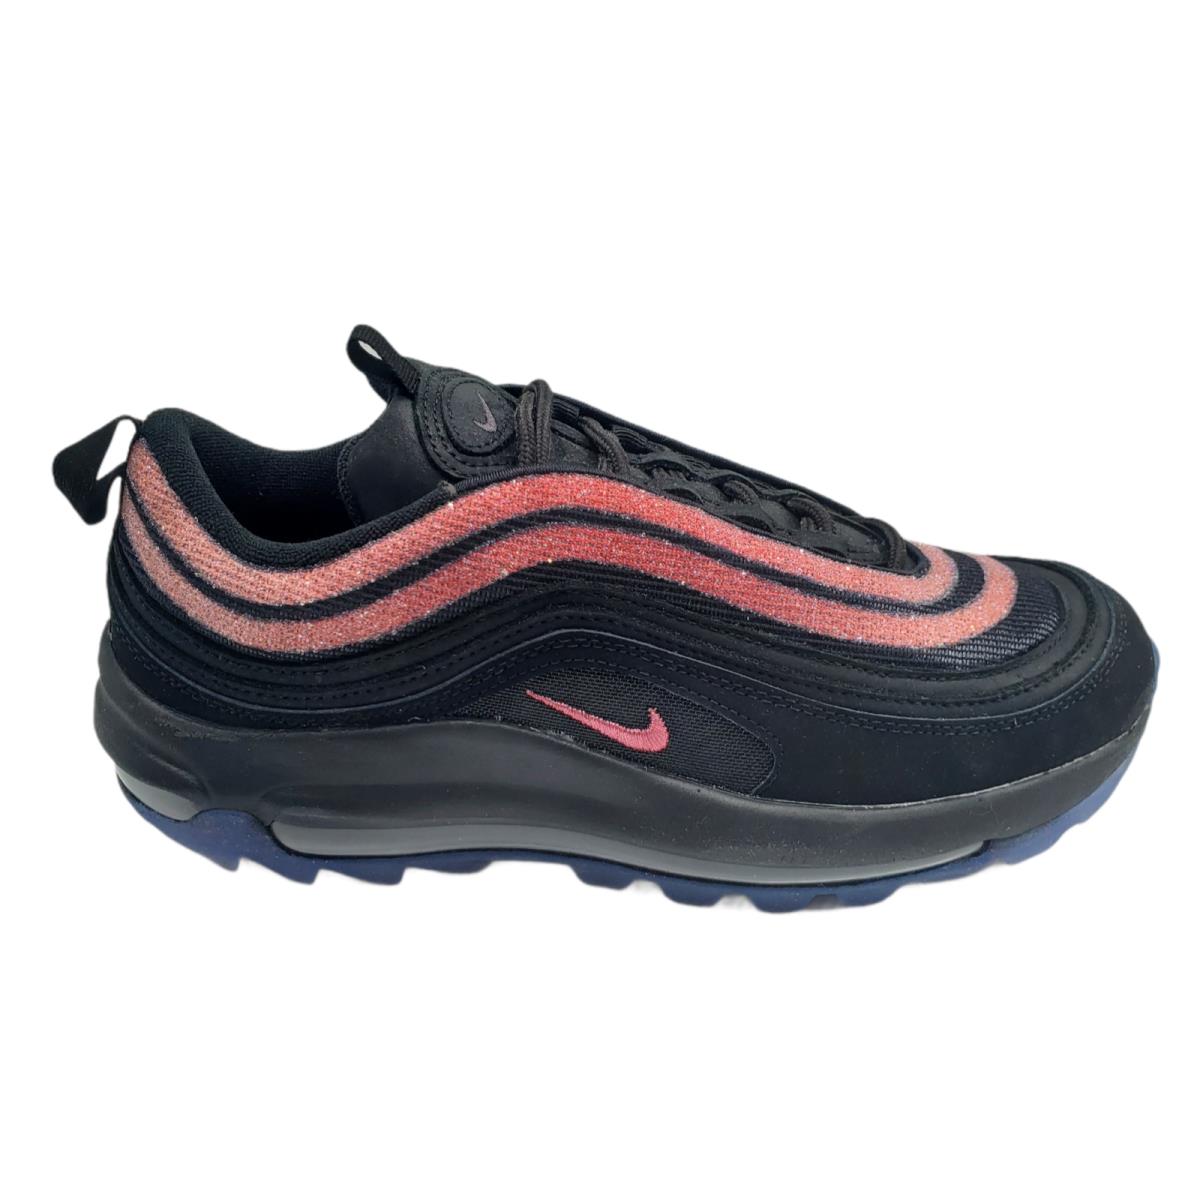 Nike Mens Air Max 97 G Nrg Black Oracle Pink Golf Shoes Sneakers Size 8